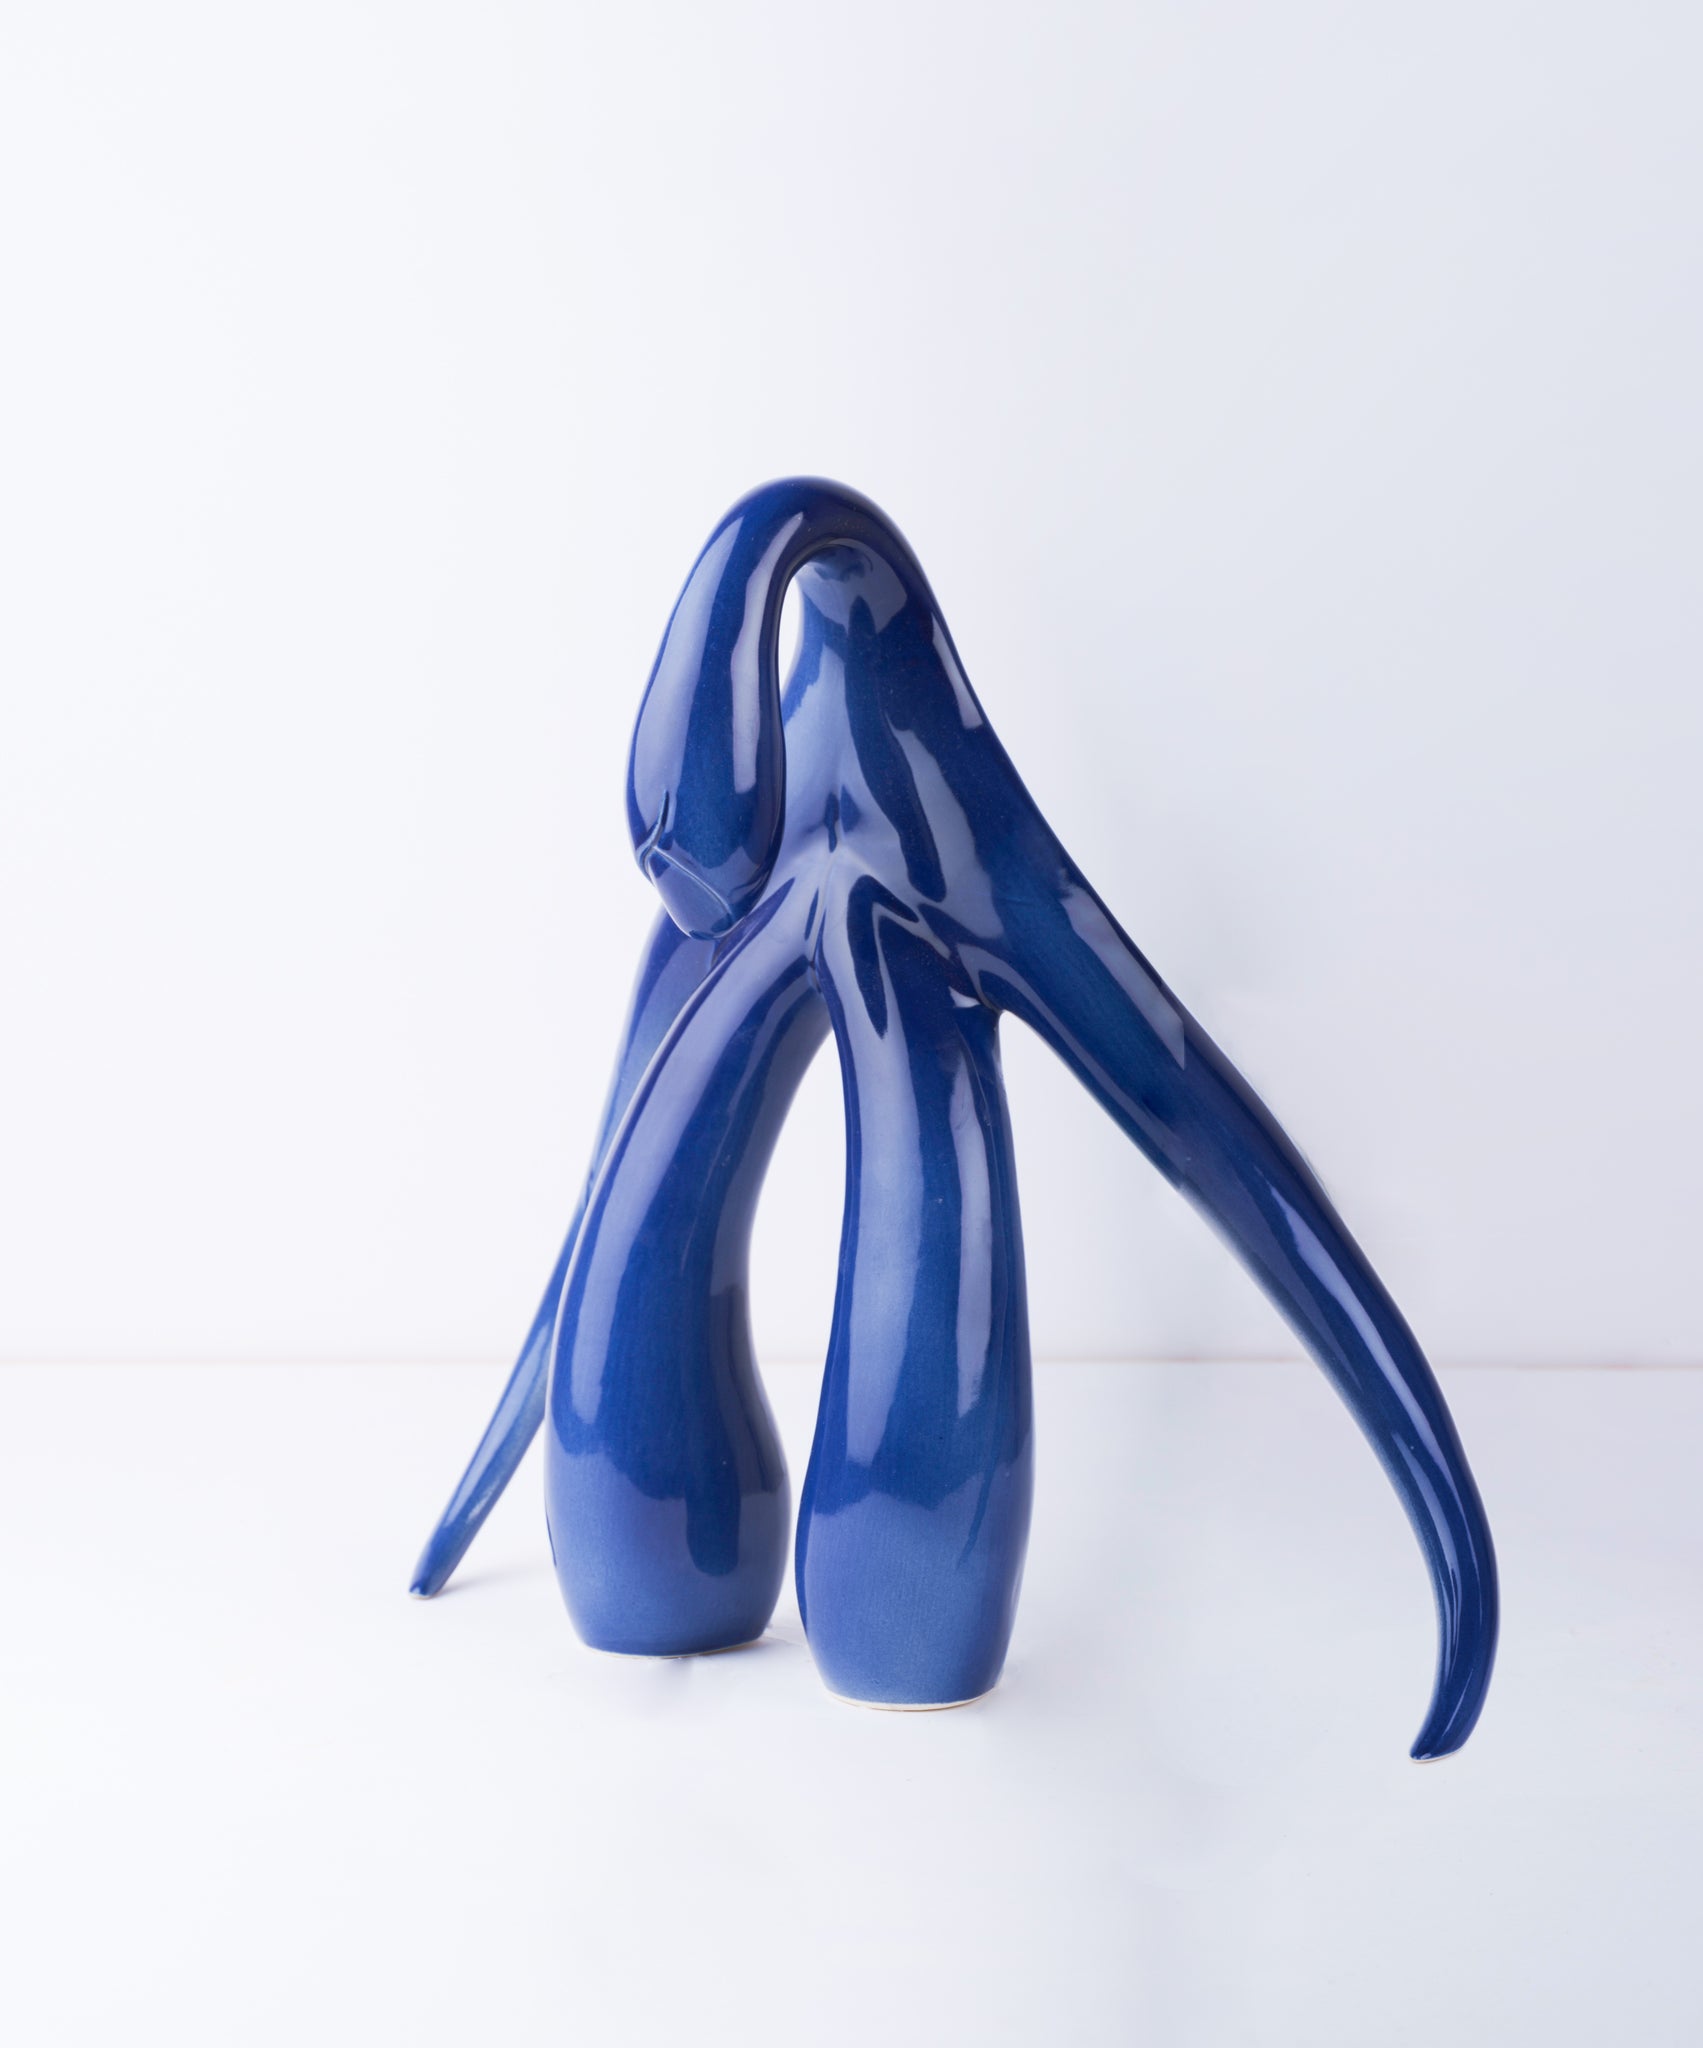 3/4 front view of "Swan Series" ceramic sculpture in cobalt by Sophia Wallace, 2022.